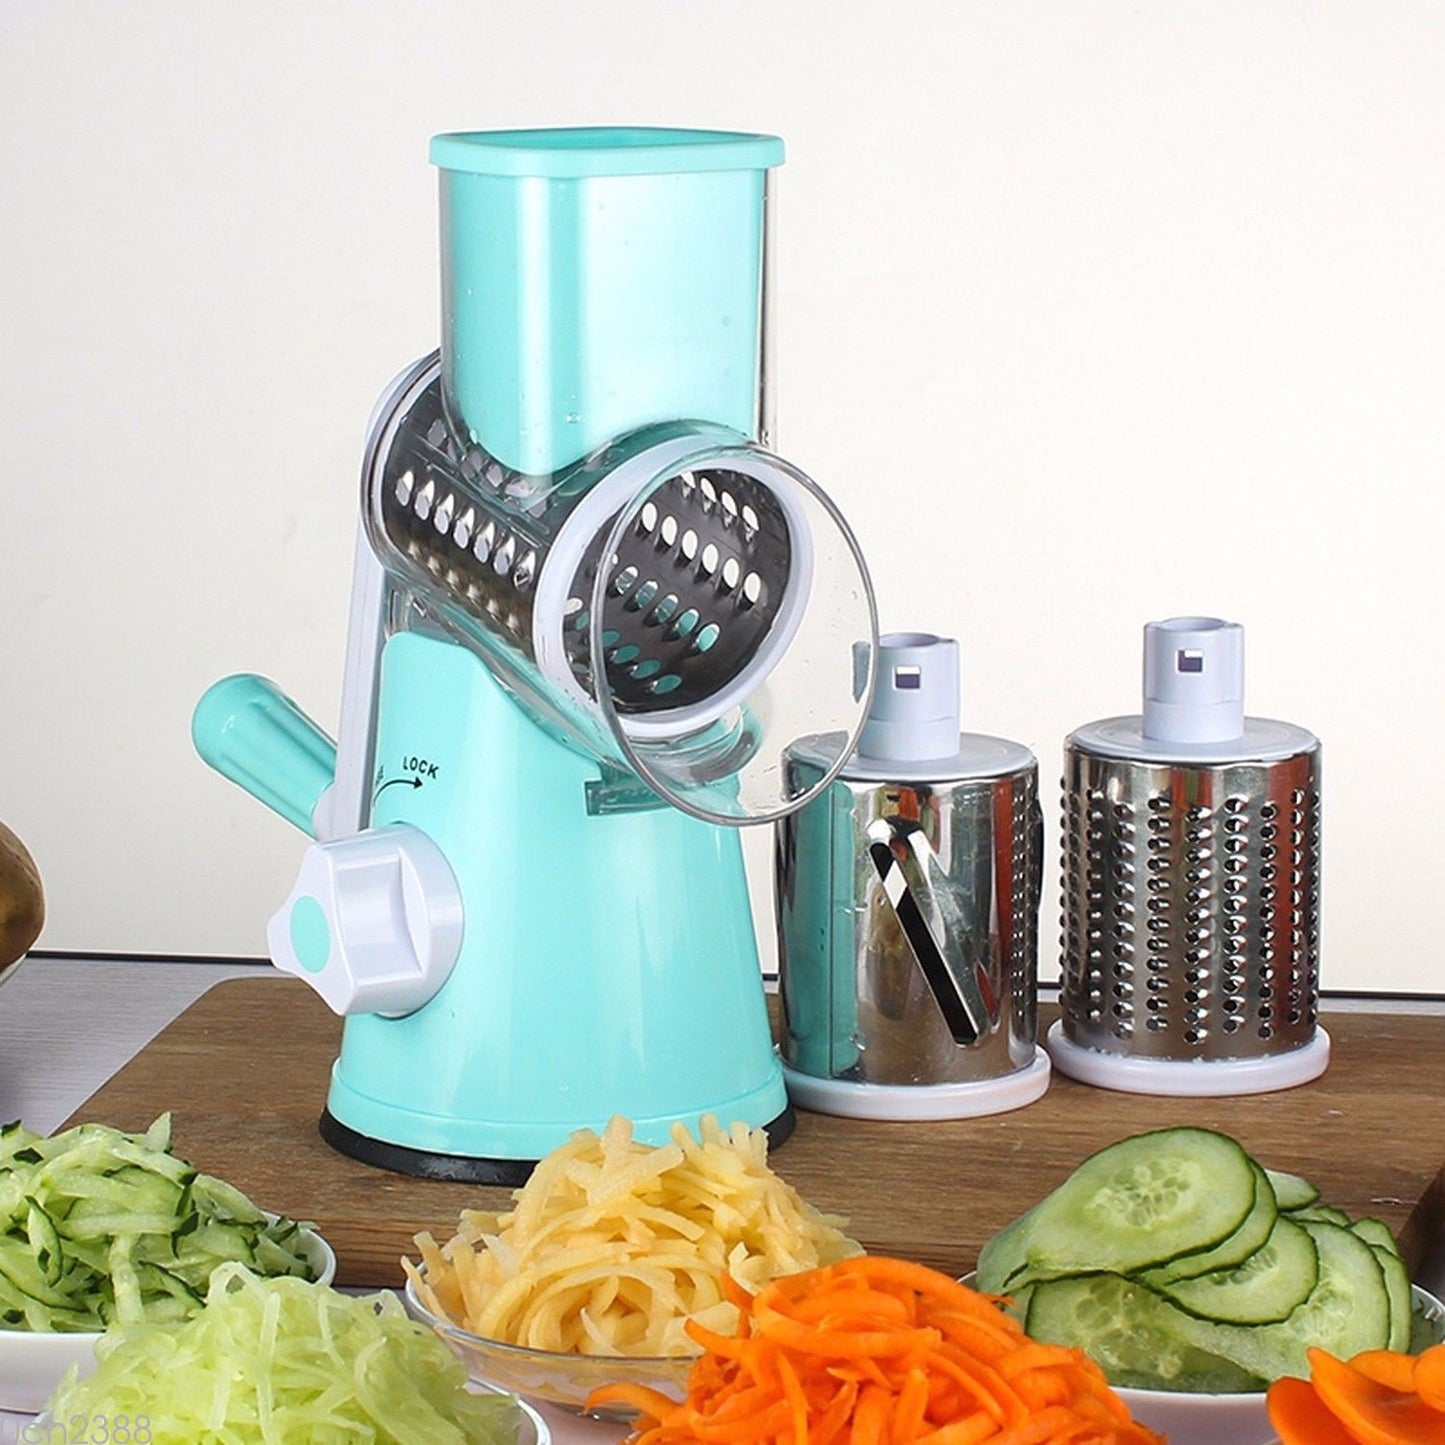 Multi-Purpose Round Mandoline Slicer: Efficiently Slice Vegetables, Julienne Potatoes, Carrots, and Grate Cheese